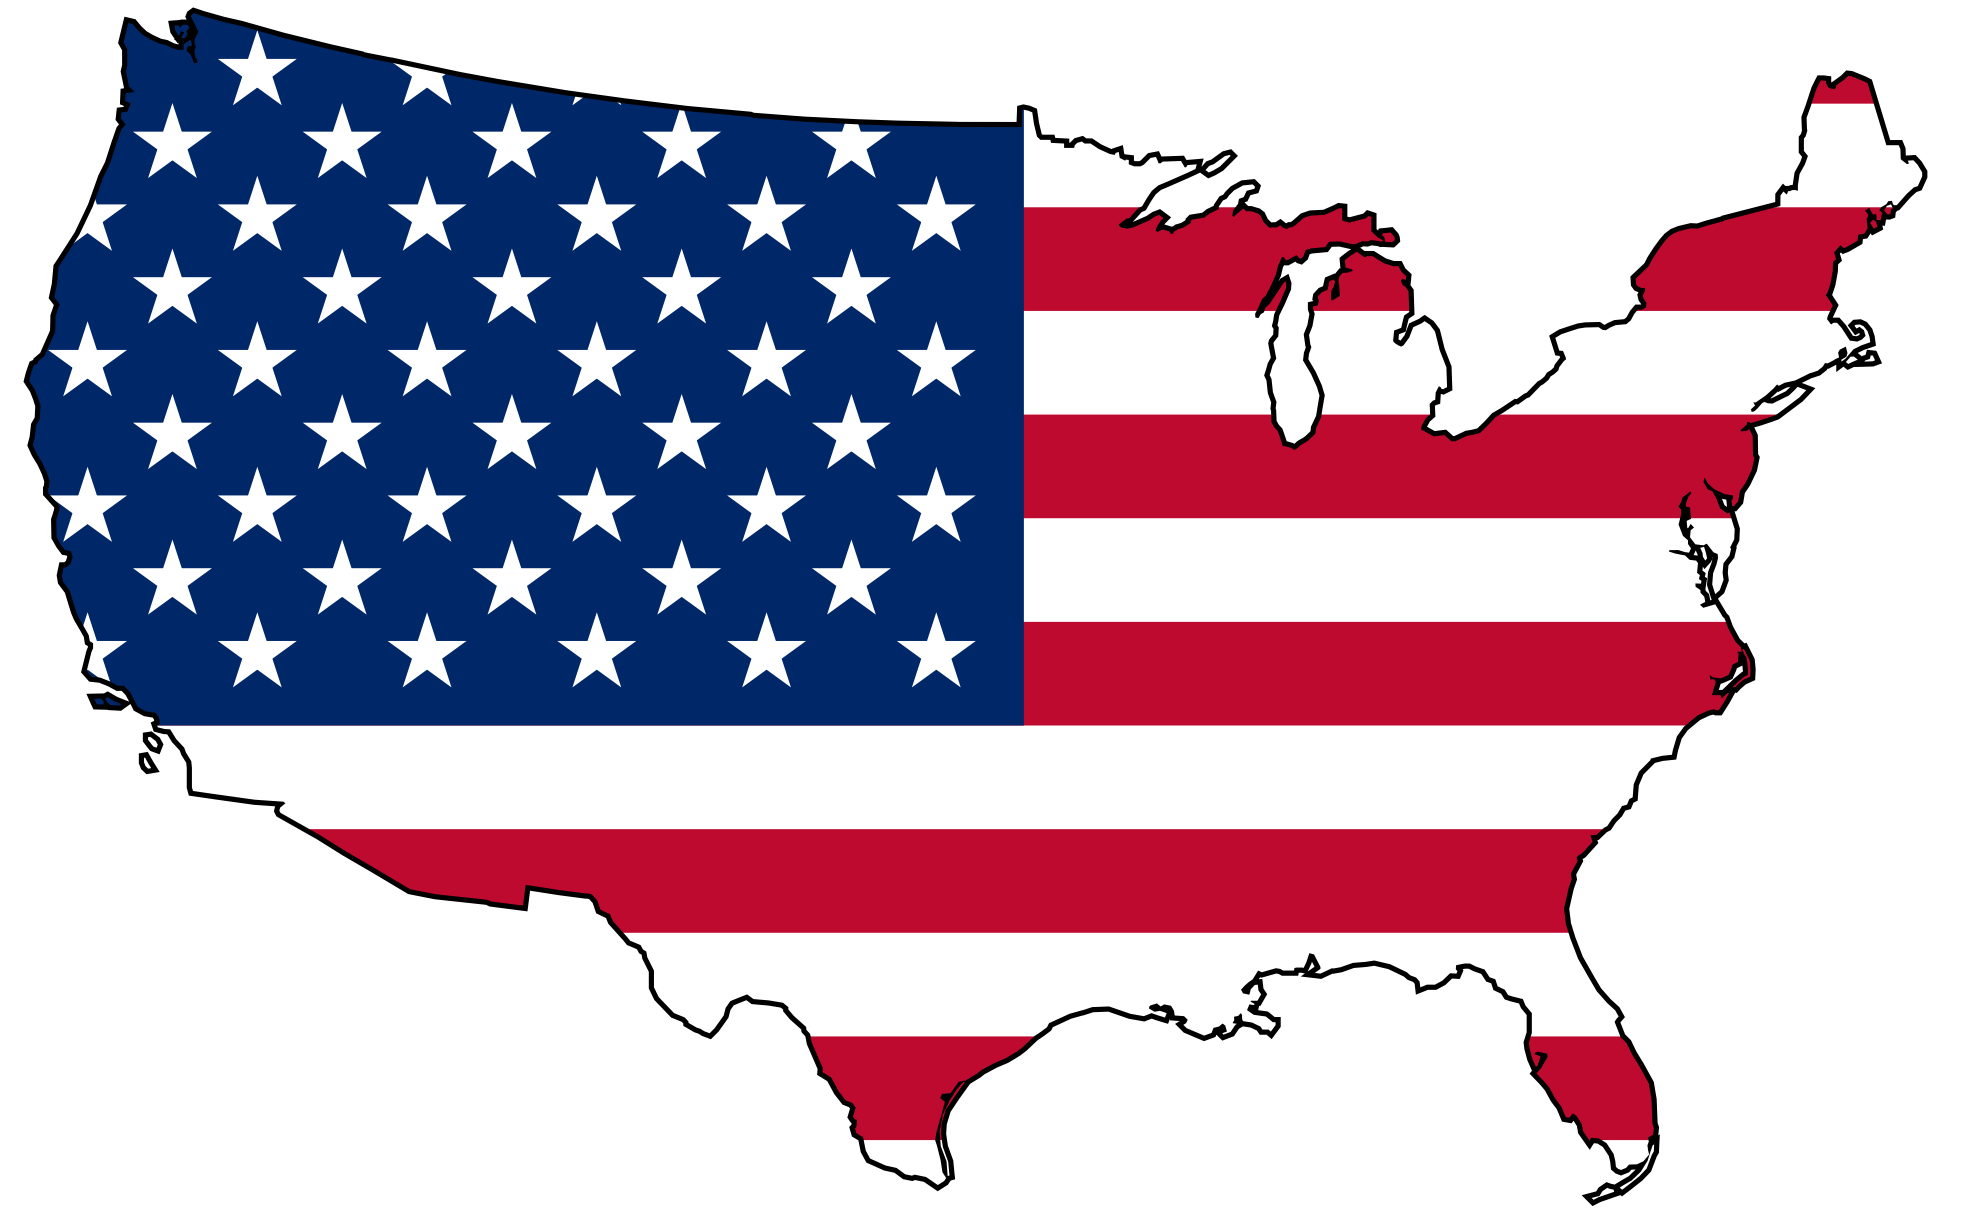 American flag banner clipart free image 5